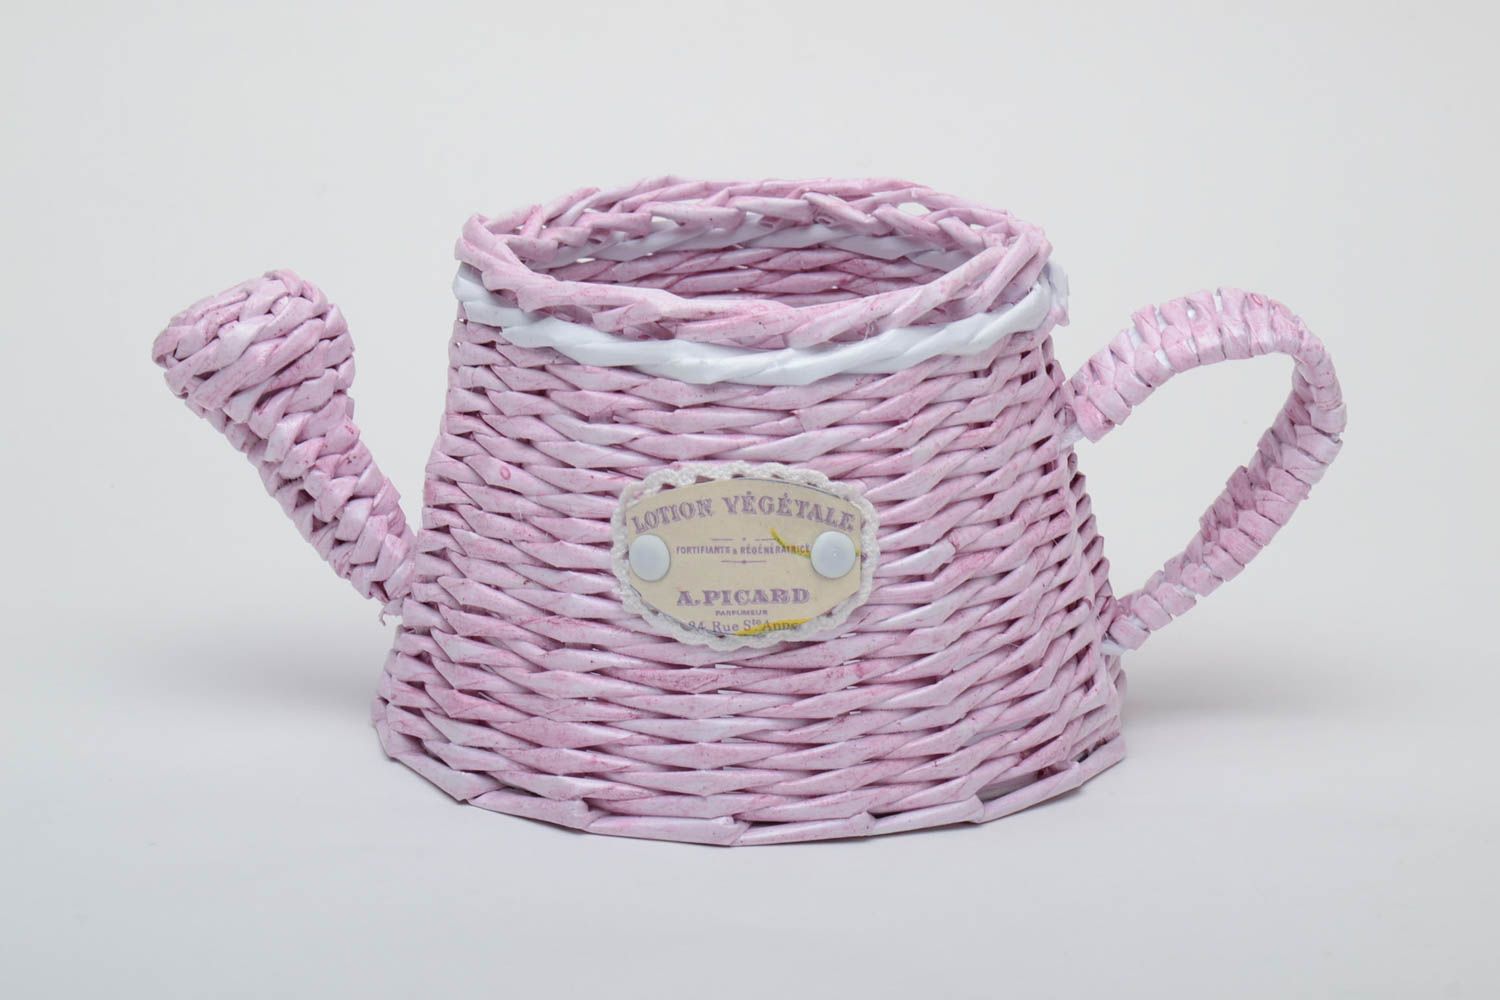 Decorative newspaper woven watering can photo 2